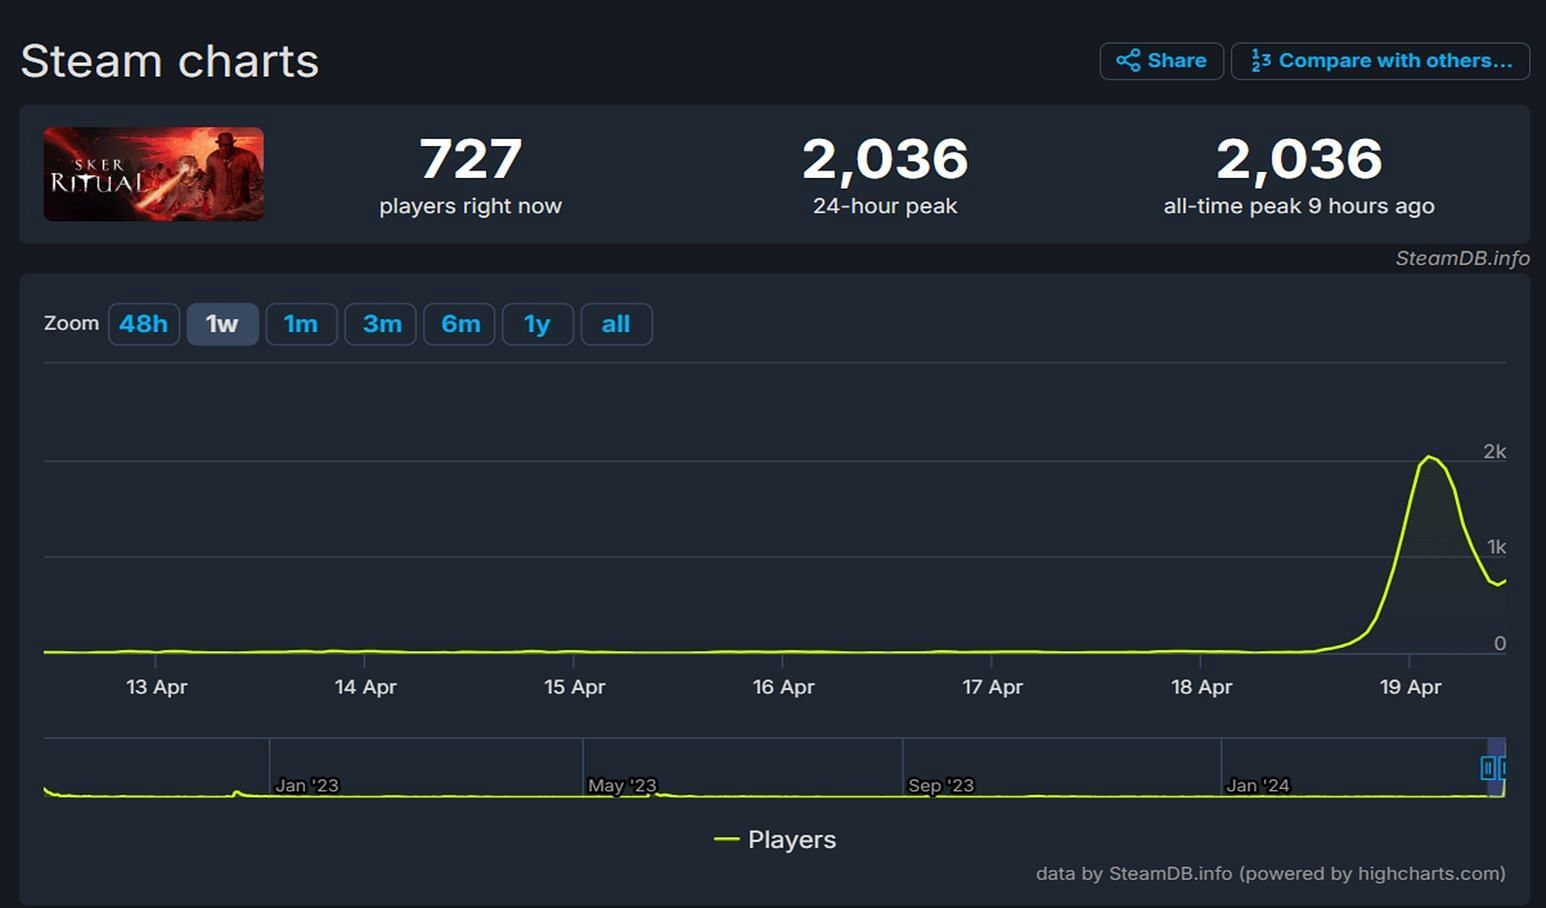 Sker Ritual round-based zombies game player count on Steam (Image via SteamDB.info)